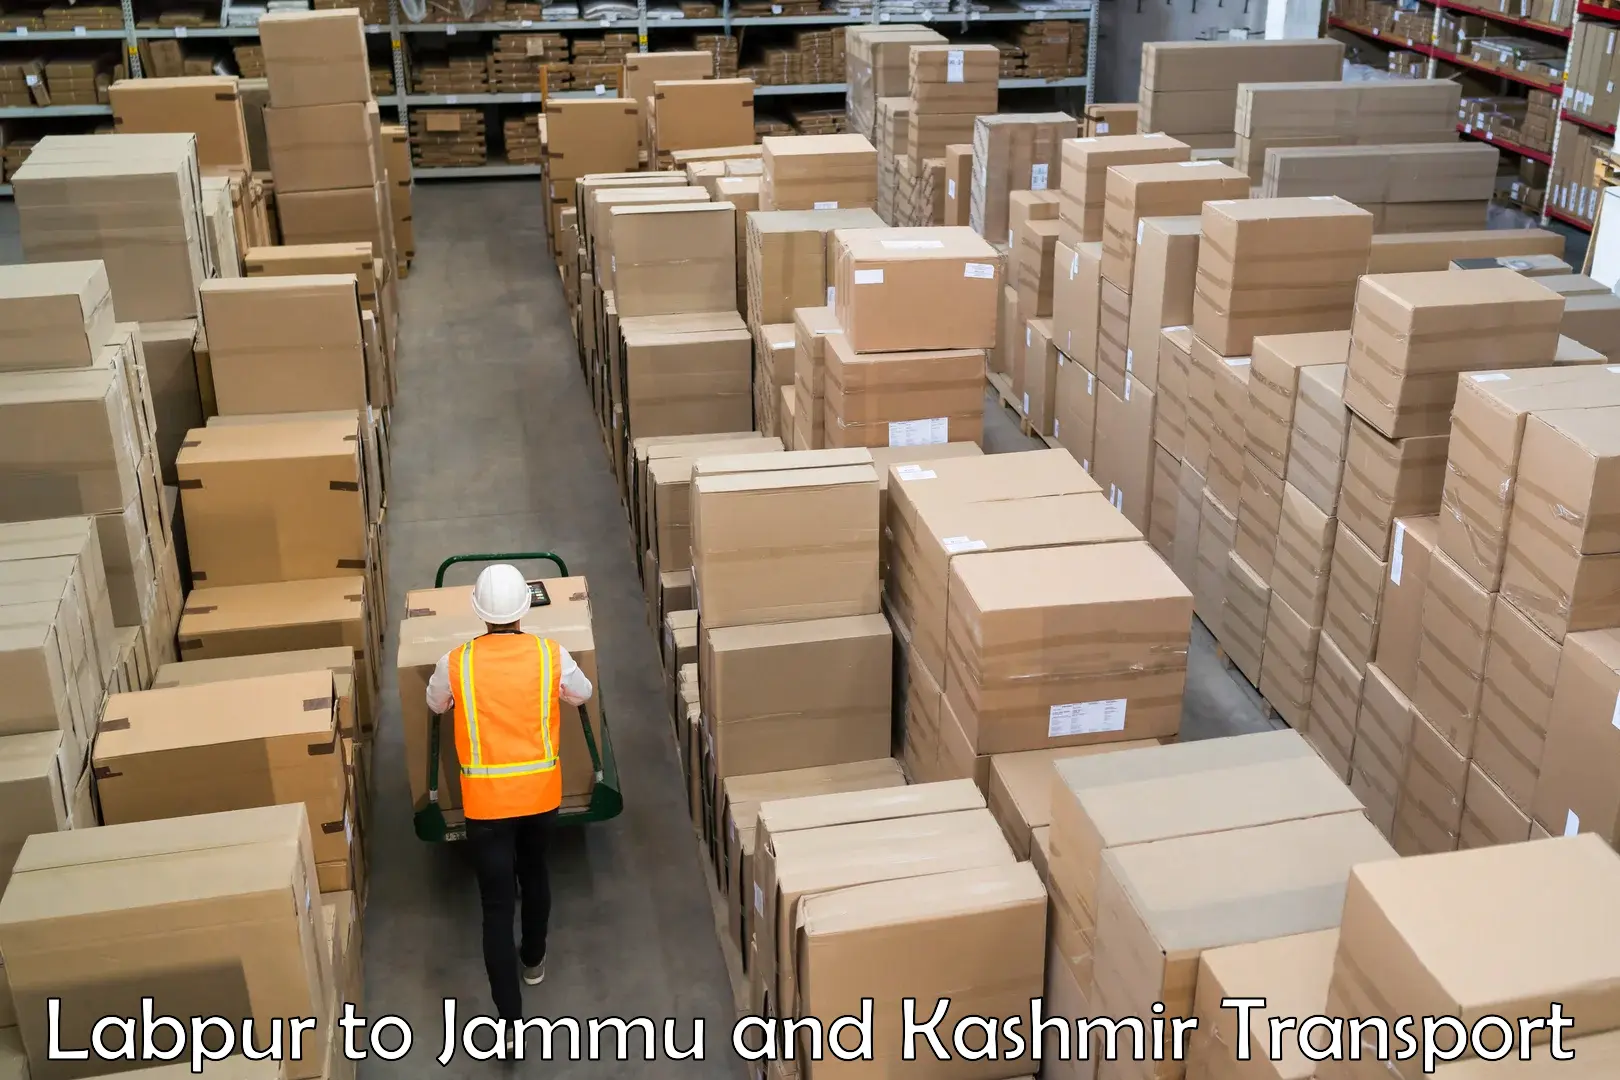 Part load transport service in India Labpur to Shopian